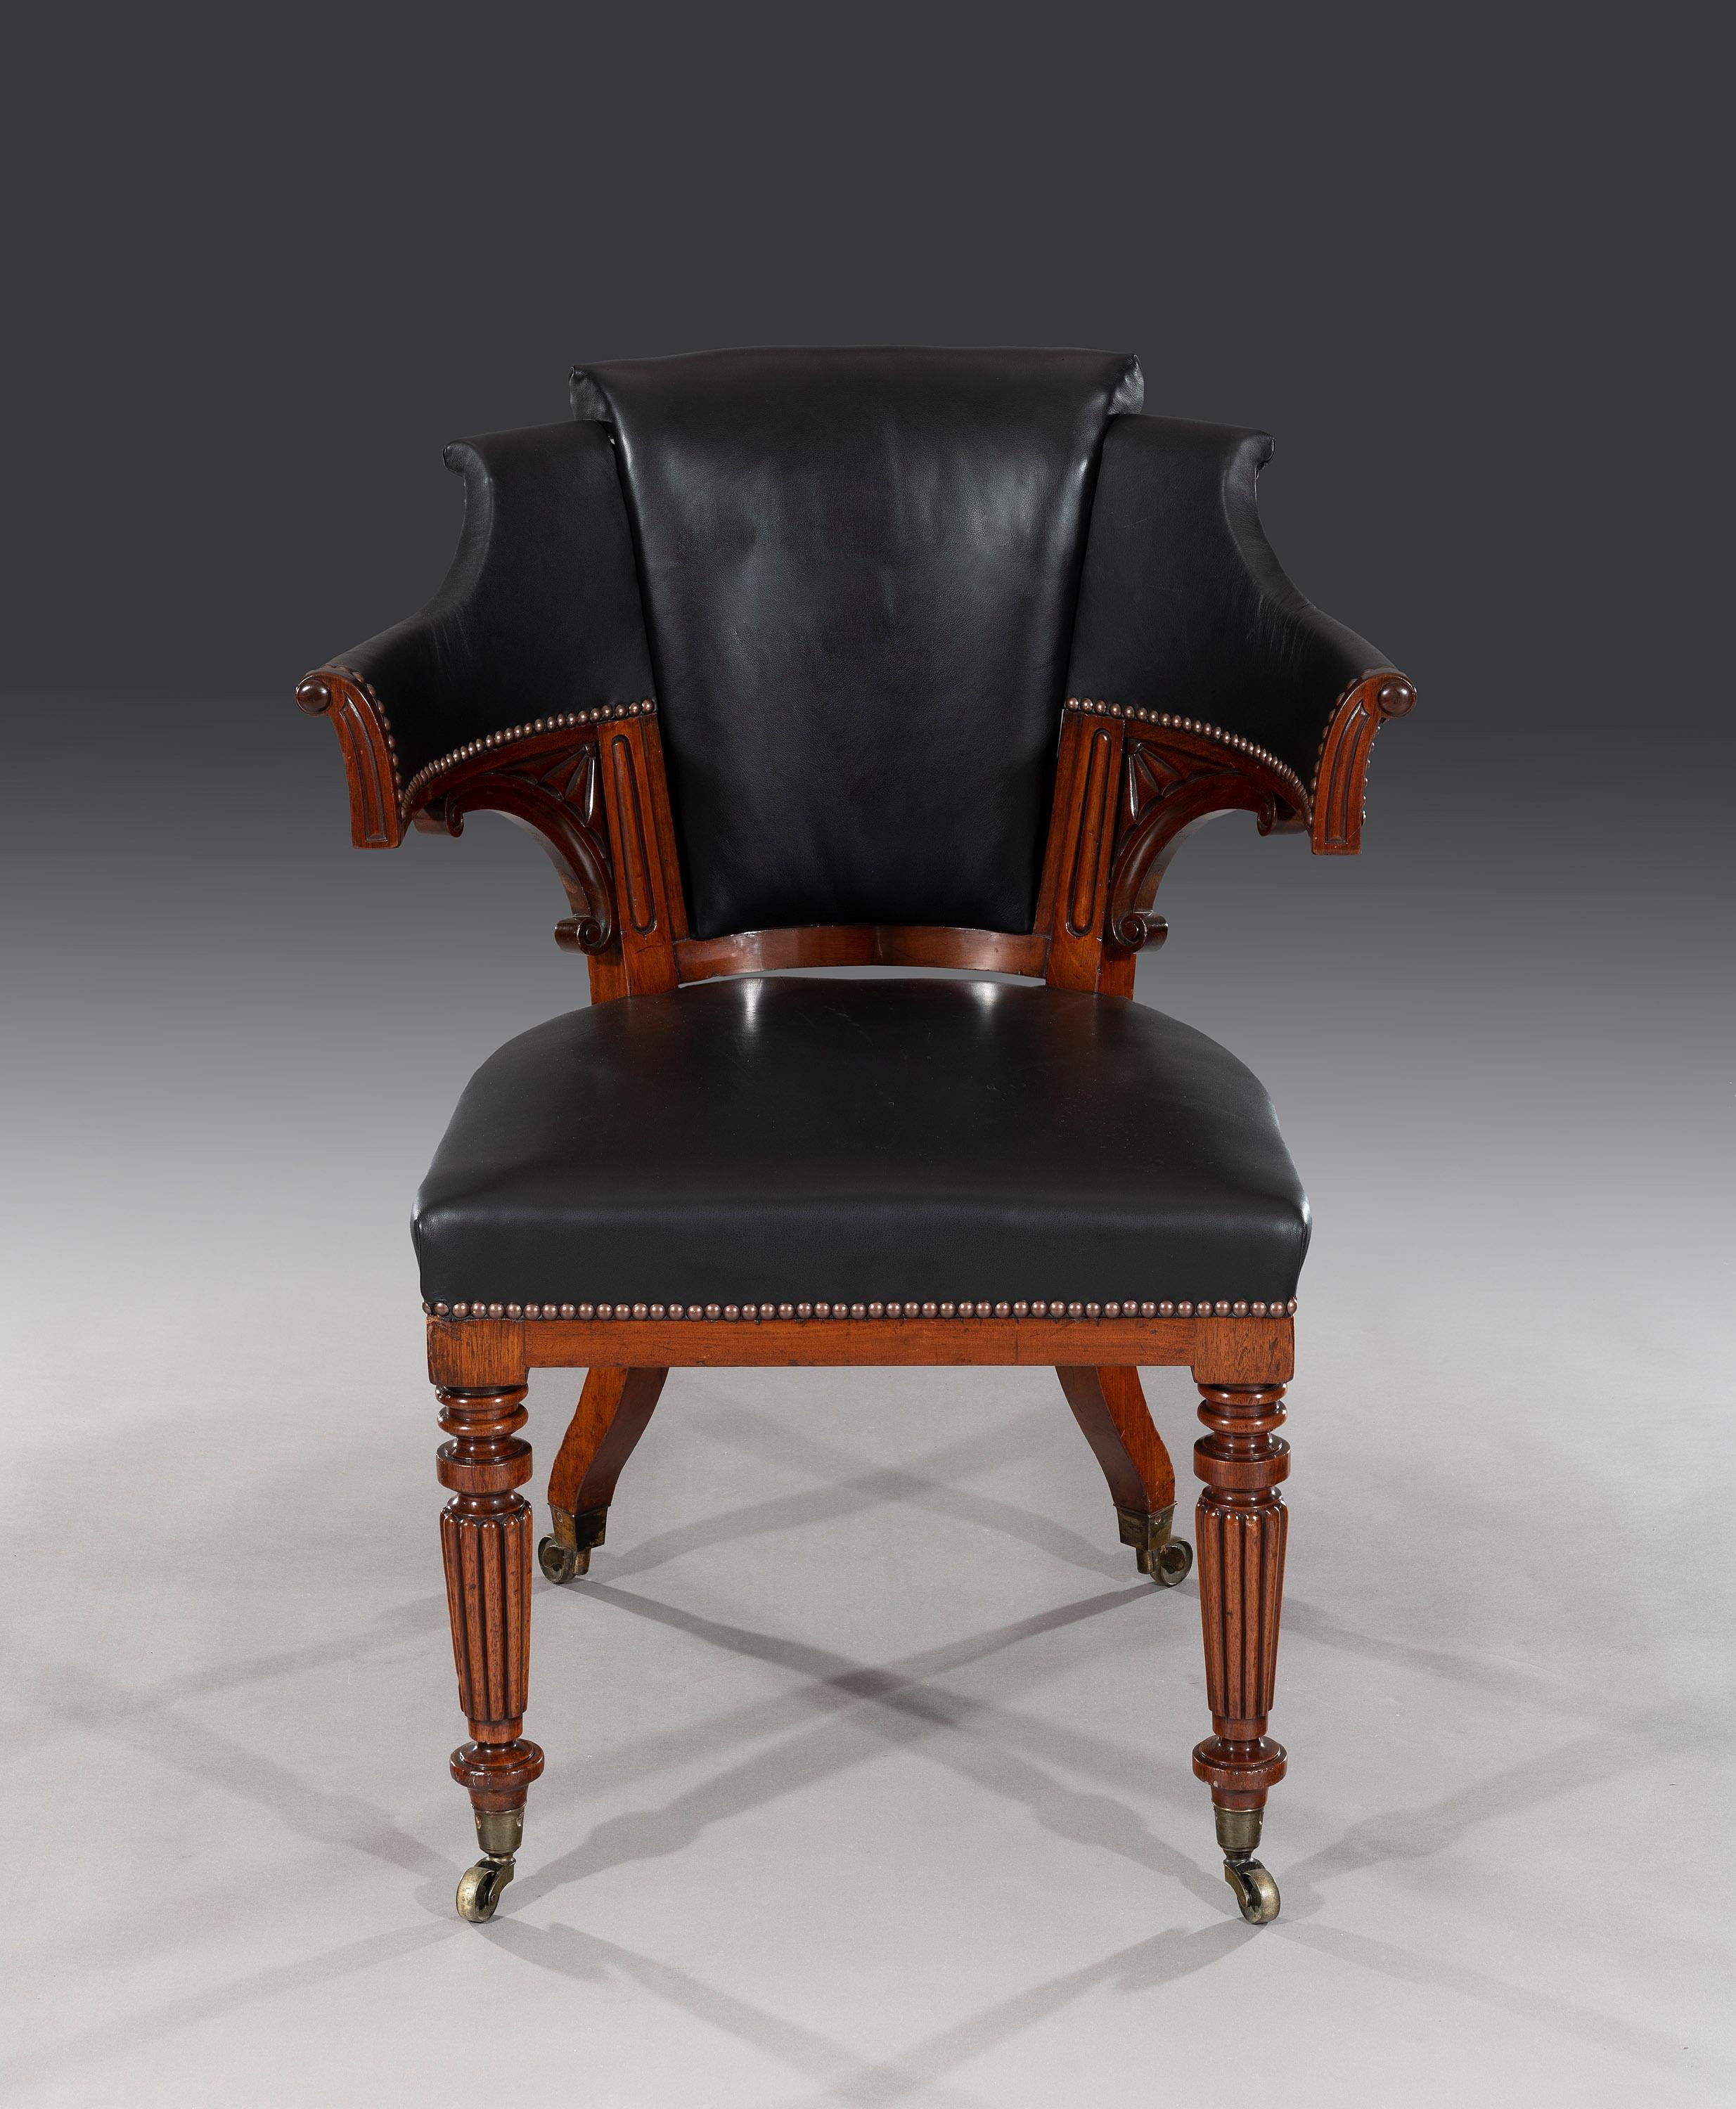 The chair is in the 'Klismos' style and it is similar in design to the klismos chair of Greek origin, which is an ancient chair form that was extensively used by the Greeks. The shape may go even further back in history, and has made several